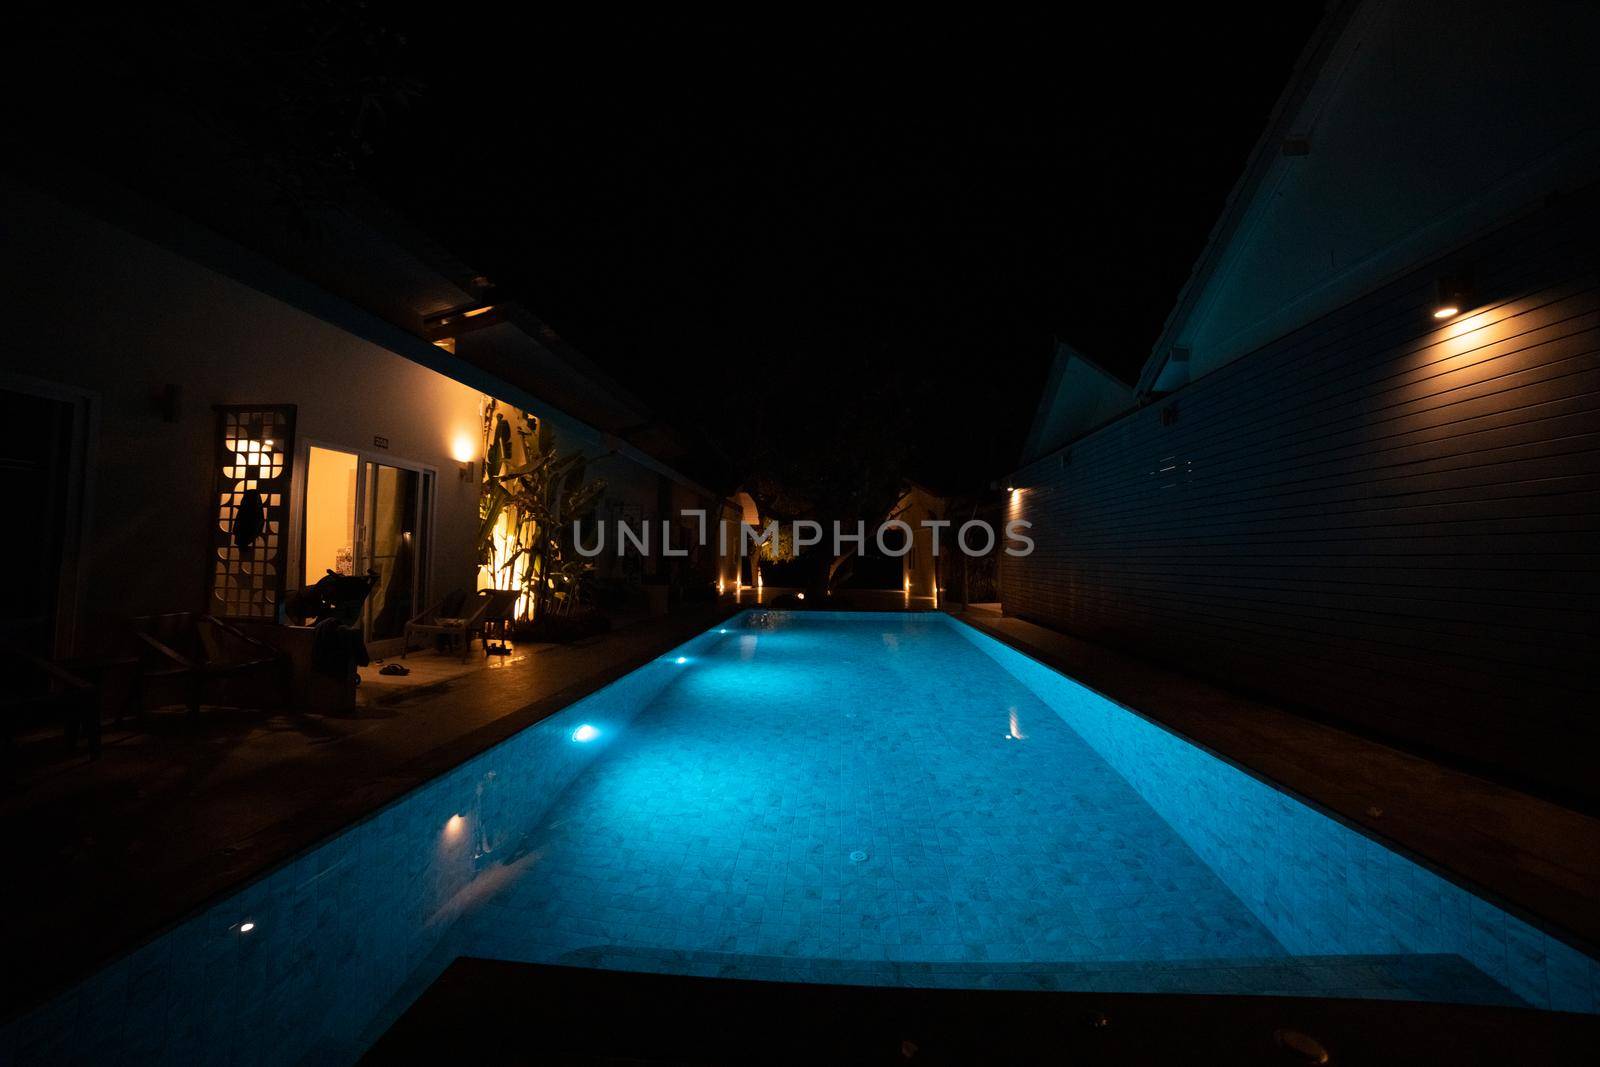 illuminated pool in the dark at night. by Mariaprovector